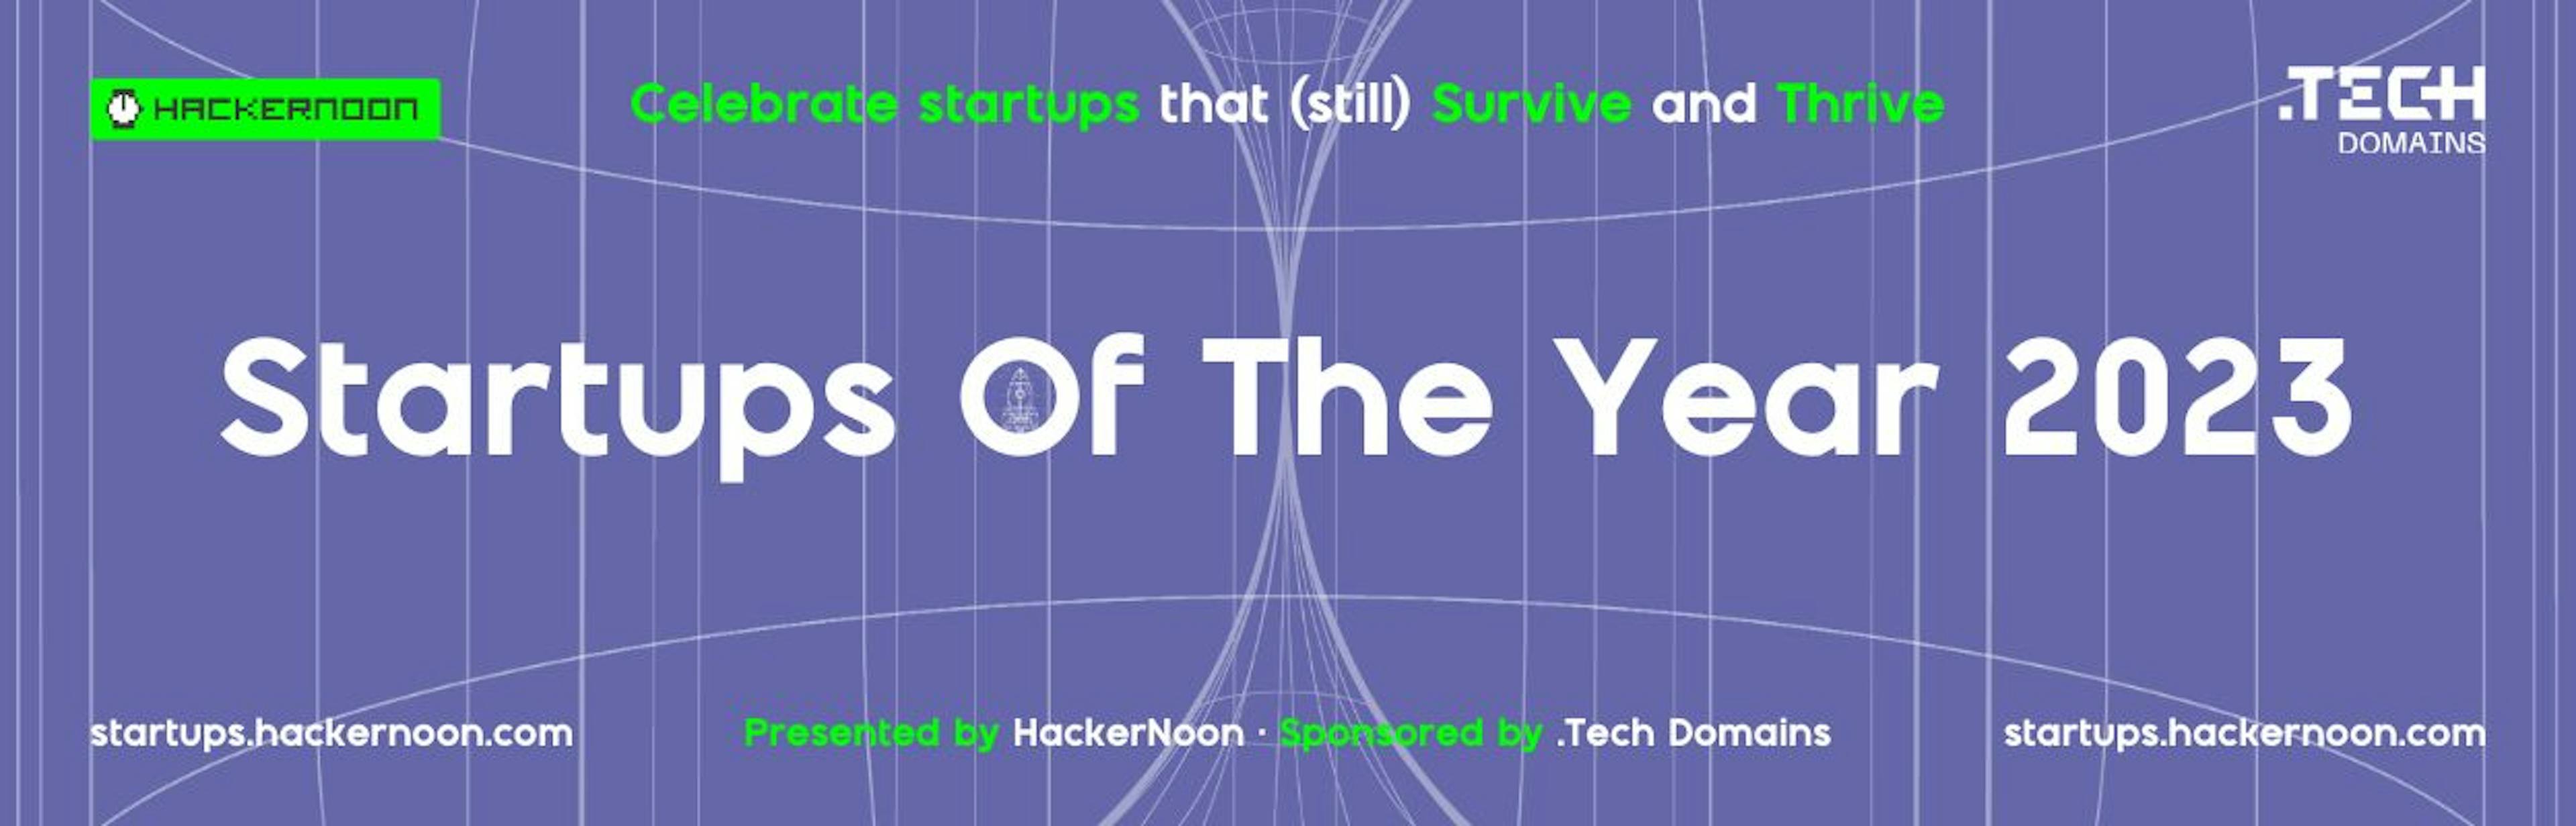 featured image - 30k+ Startups, 4k+ Cities: Startups of the Year 2023 by HackerNoon is Here!